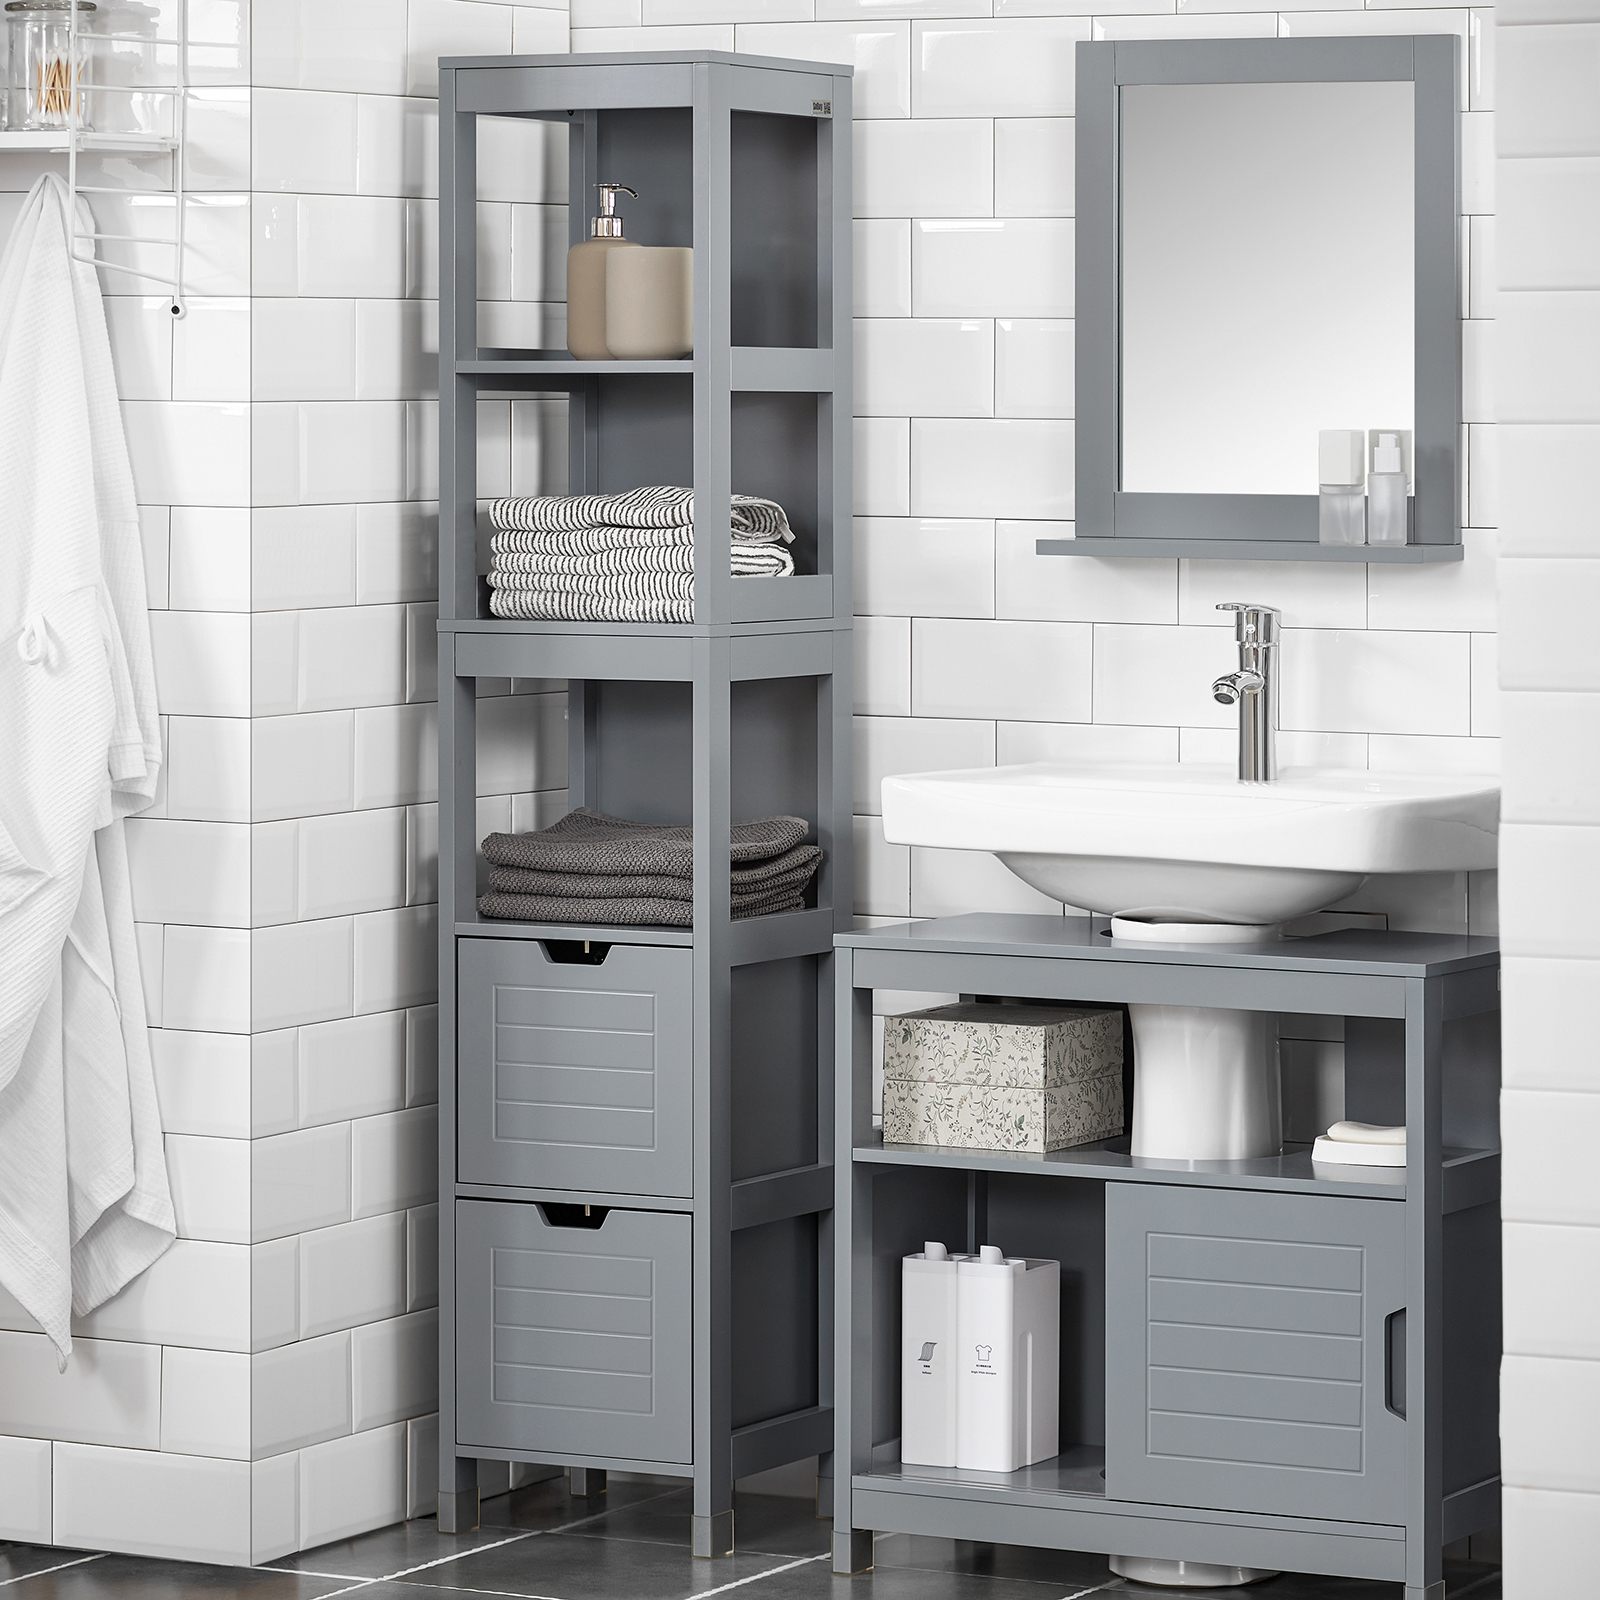 SoBuy Tall Bathroom Storage Cabinet with 3 Shelves and 2 Drawers, FRG126-SG